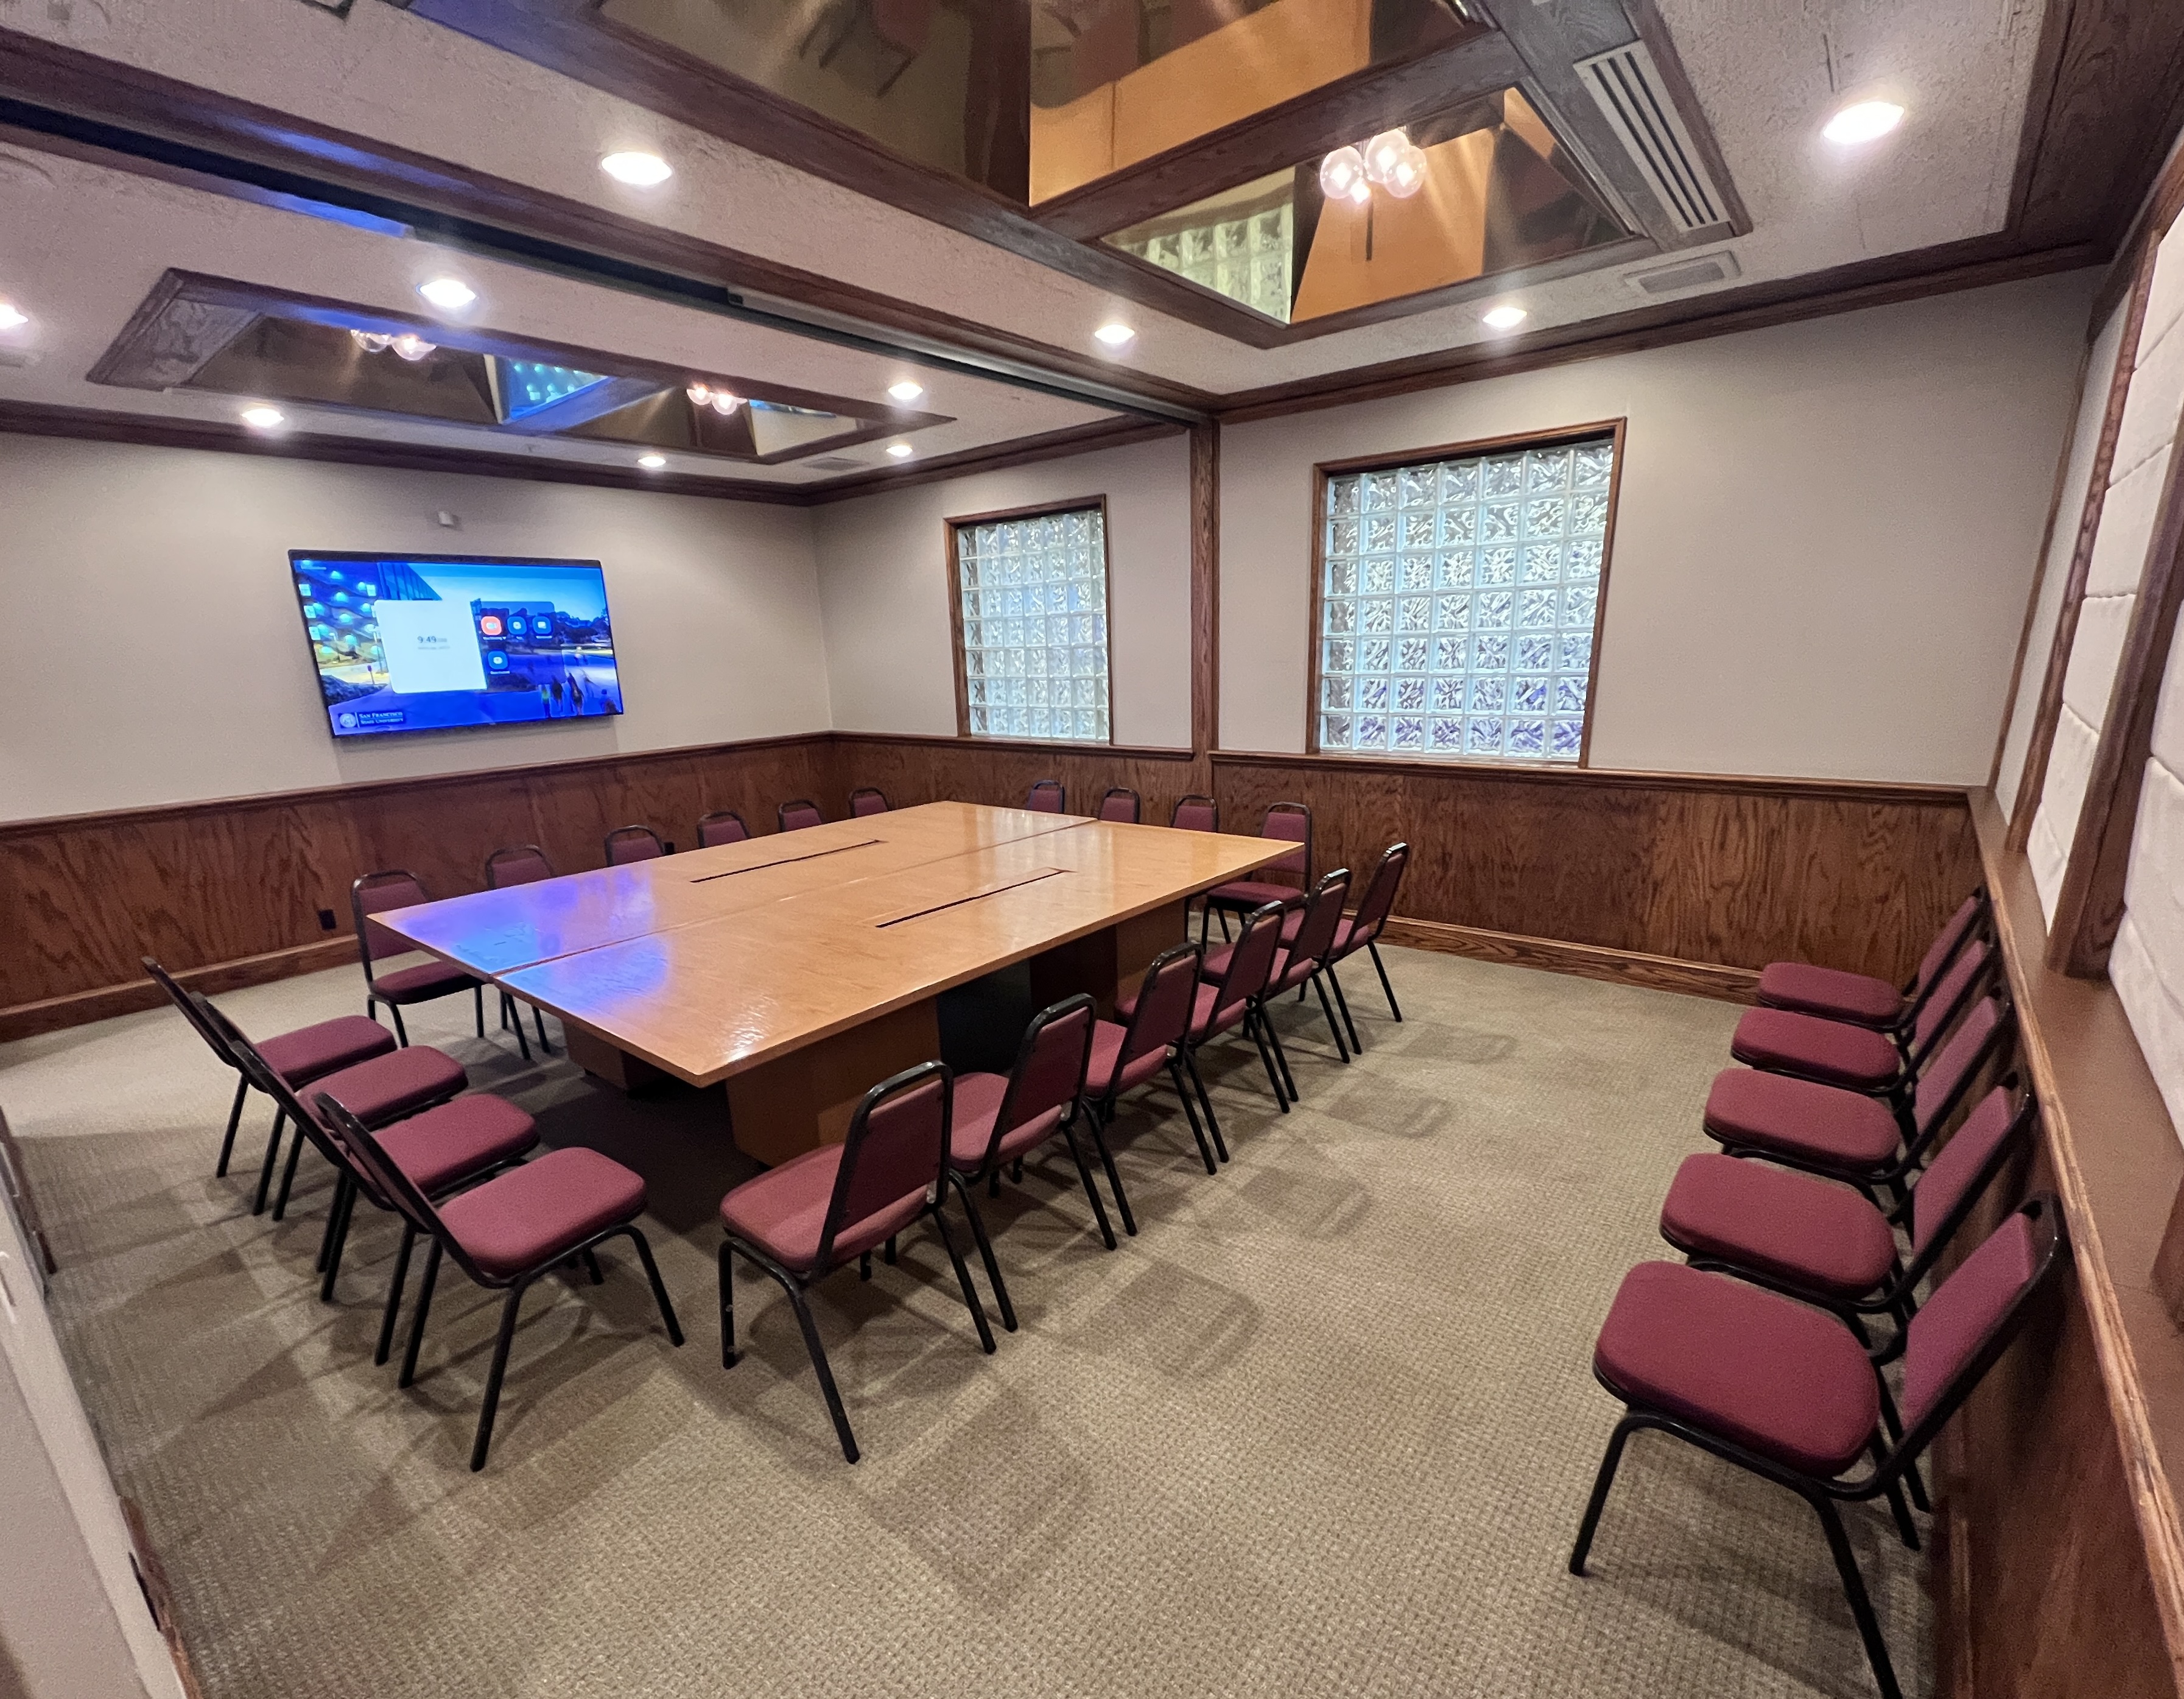 Breakout room at the Seven Hills Conference Center